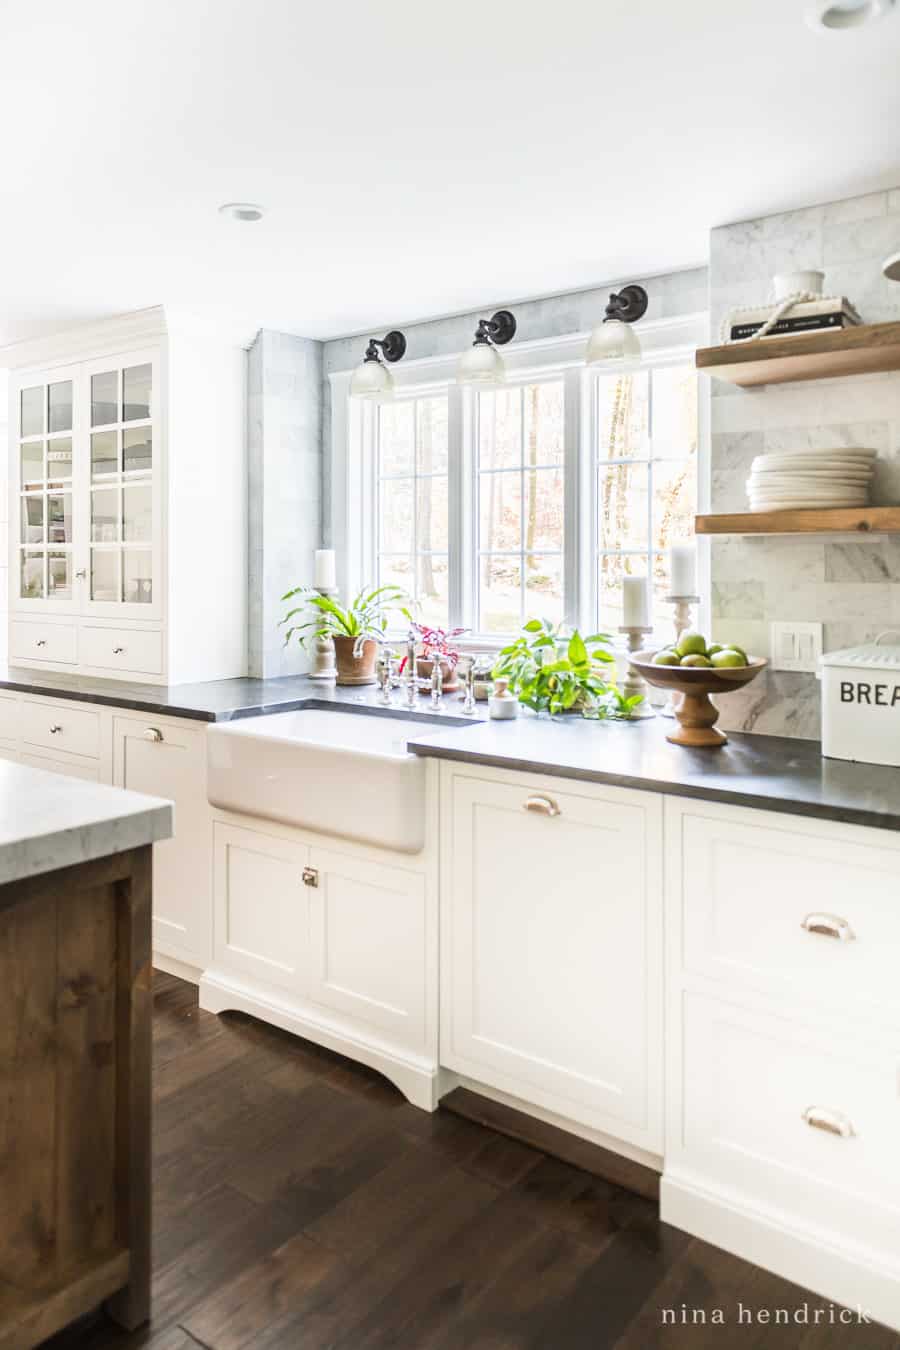 Hidden dishwasher and trash cans in a classic kitchen makeover